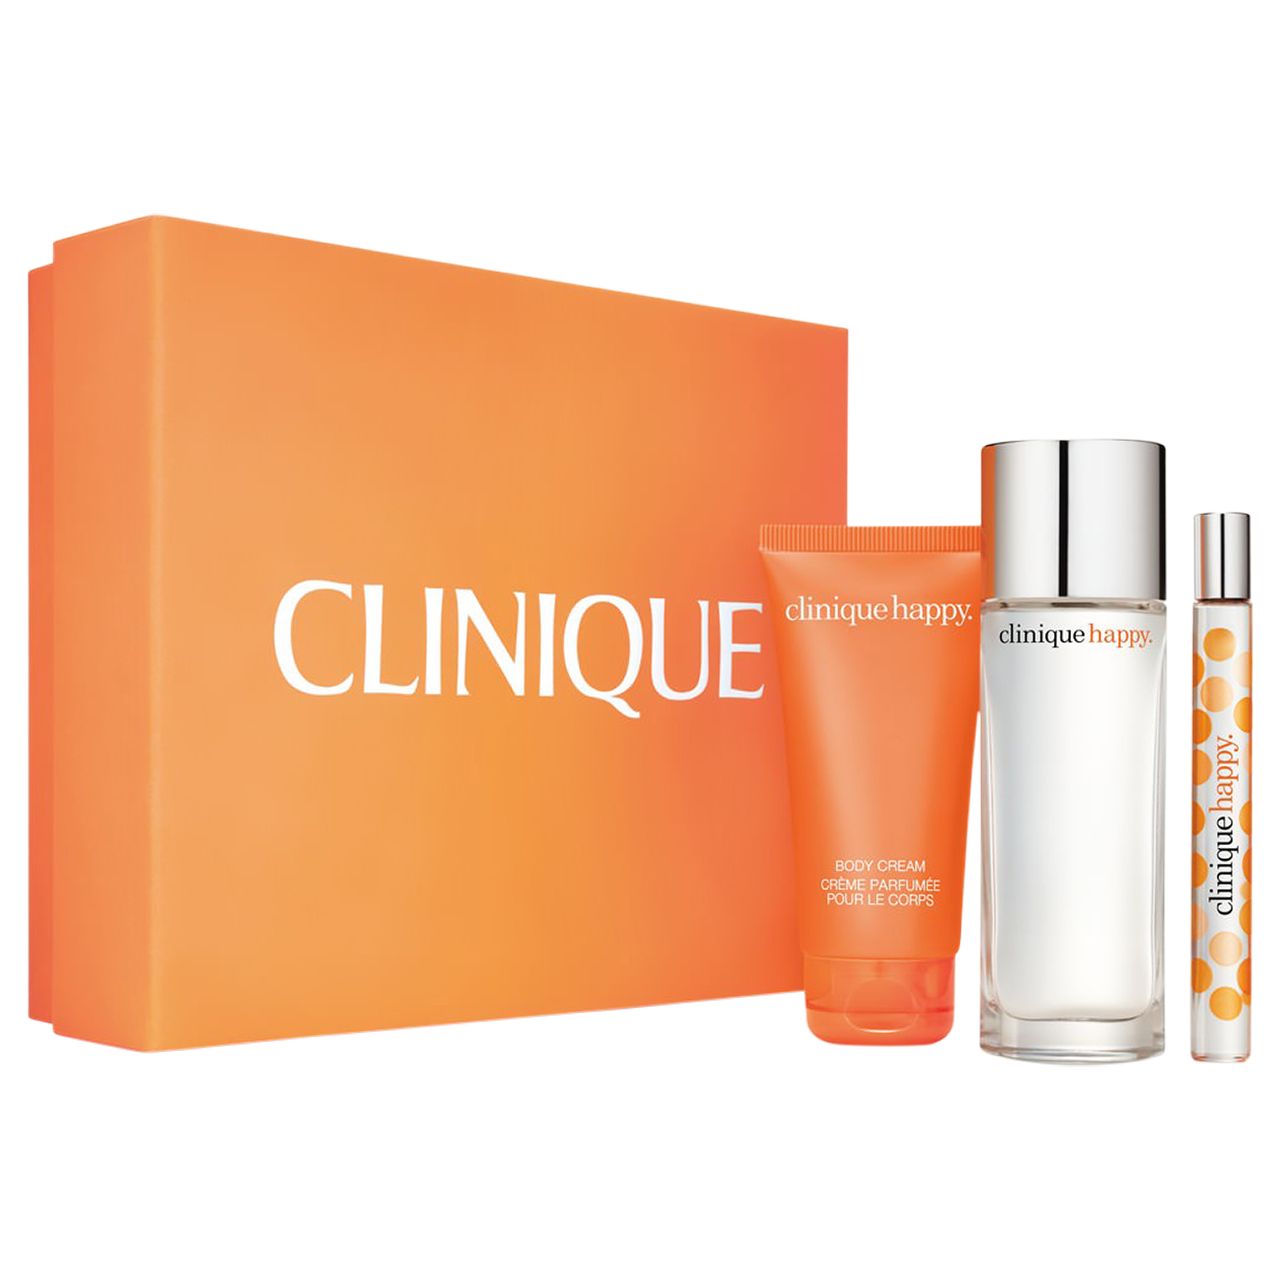 Clinique Happy Fragrance Gift Set at John Lewis & Partners